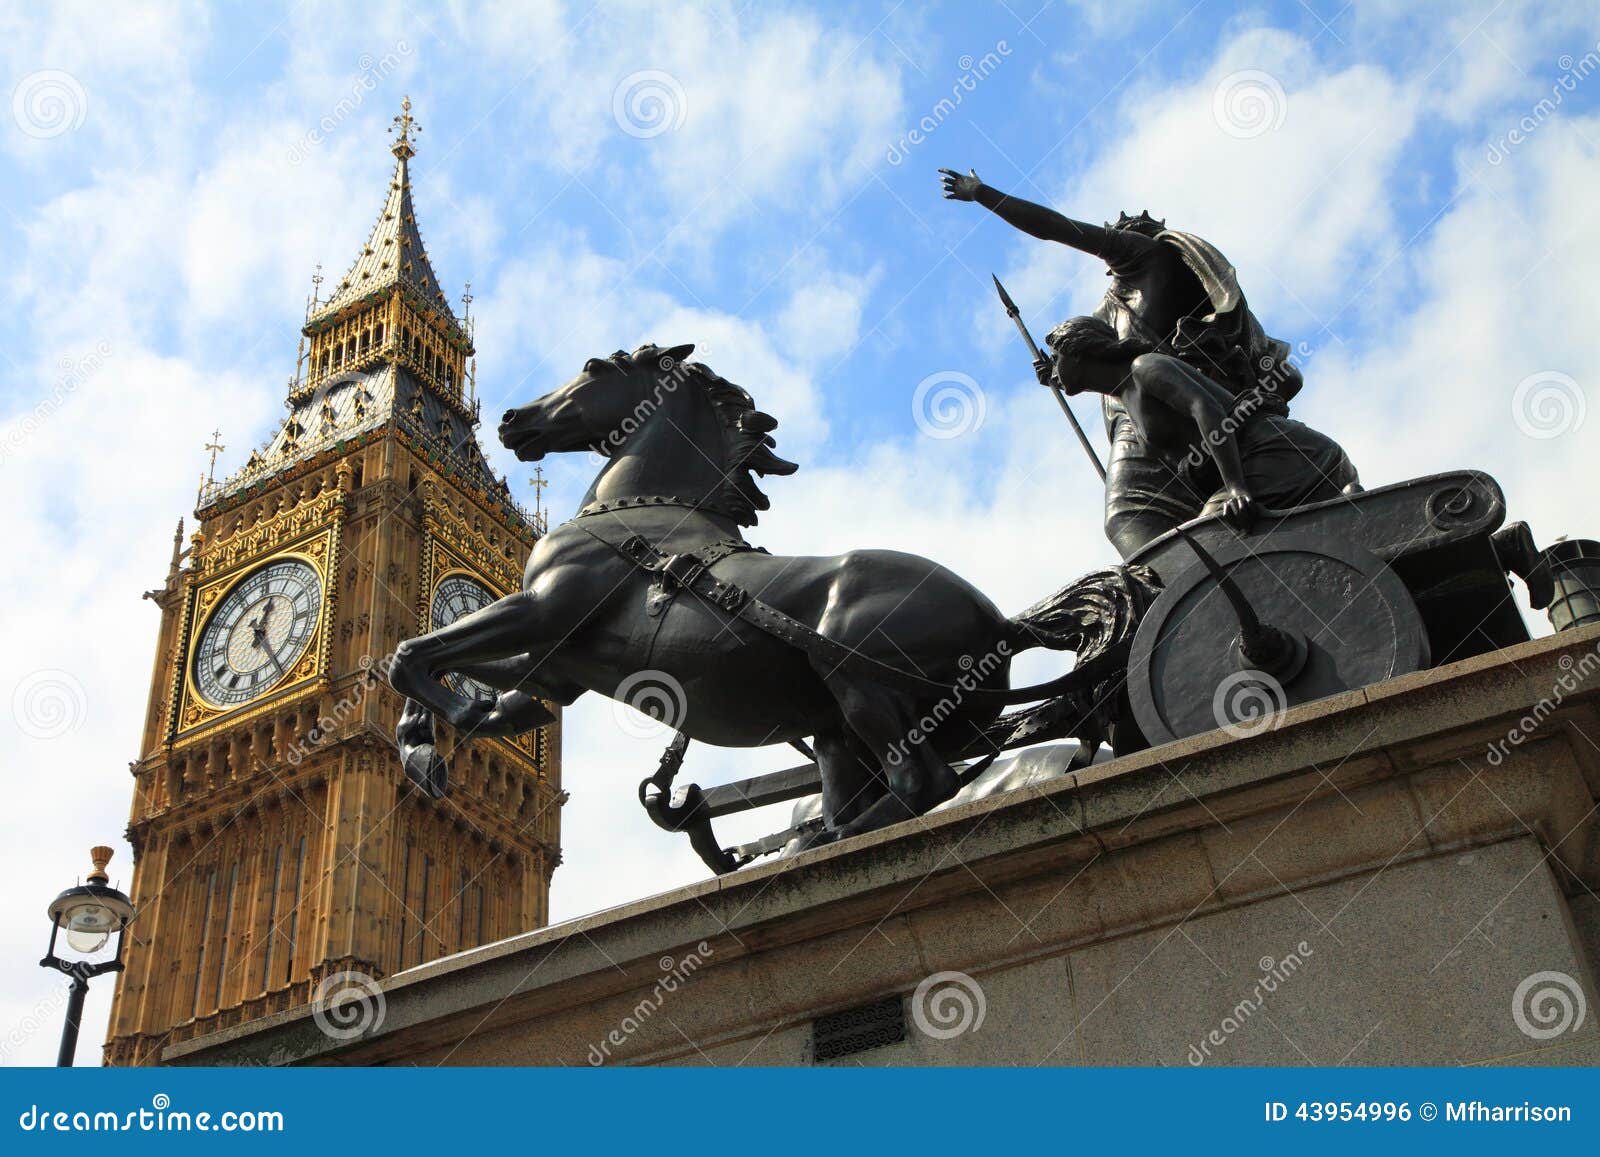 Big Ben and the Boadicea Statue CD5 NEW Old Stock London Postcard 